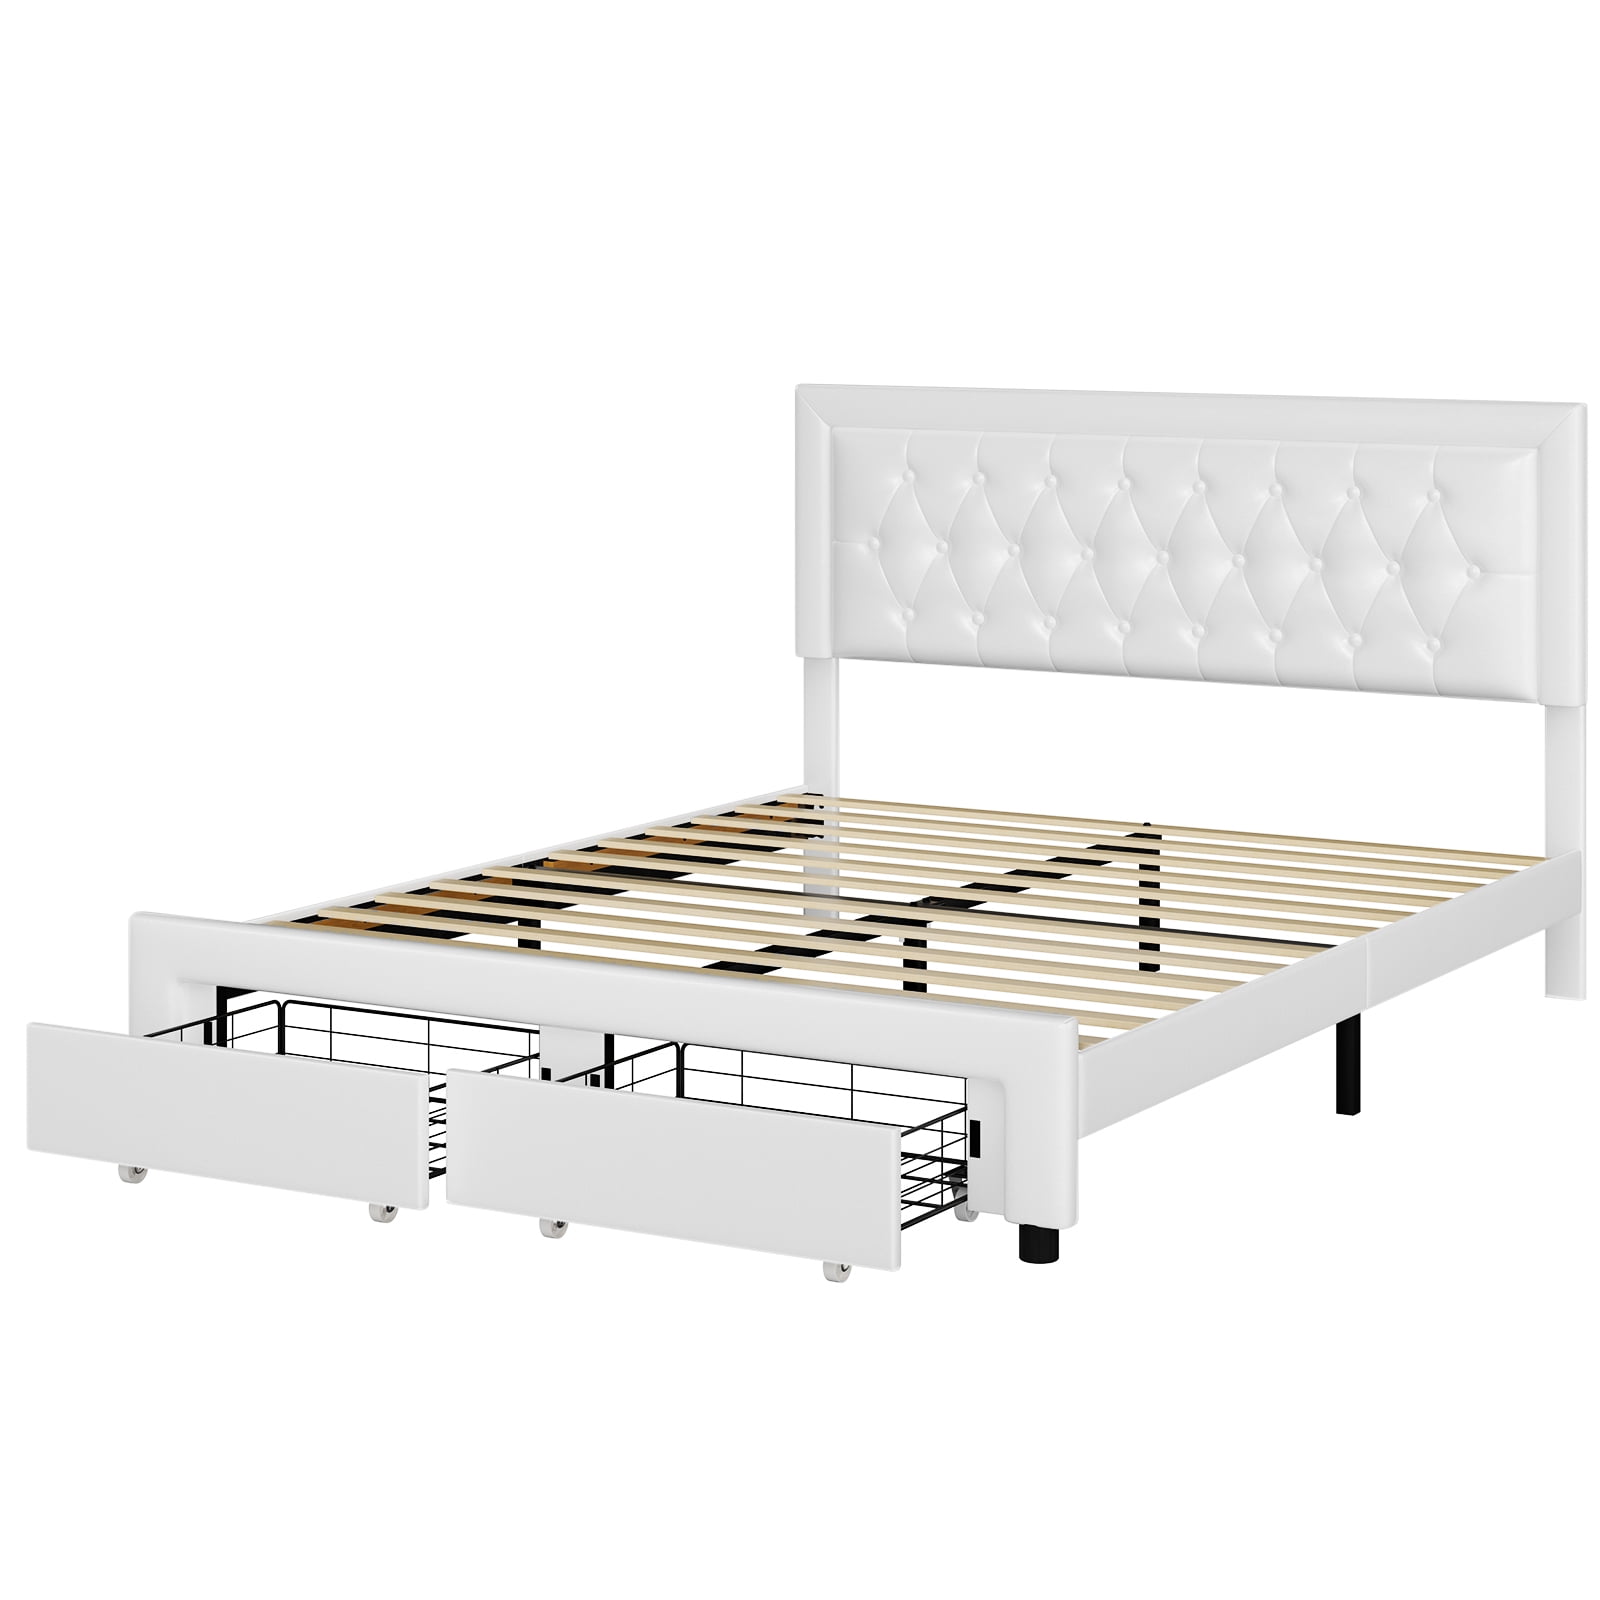 Homfa Queen Size Bed Frame with 2 Drawers, PU Leather Upholstered Platform  Bed with Adjustable Button Headboard, Beige